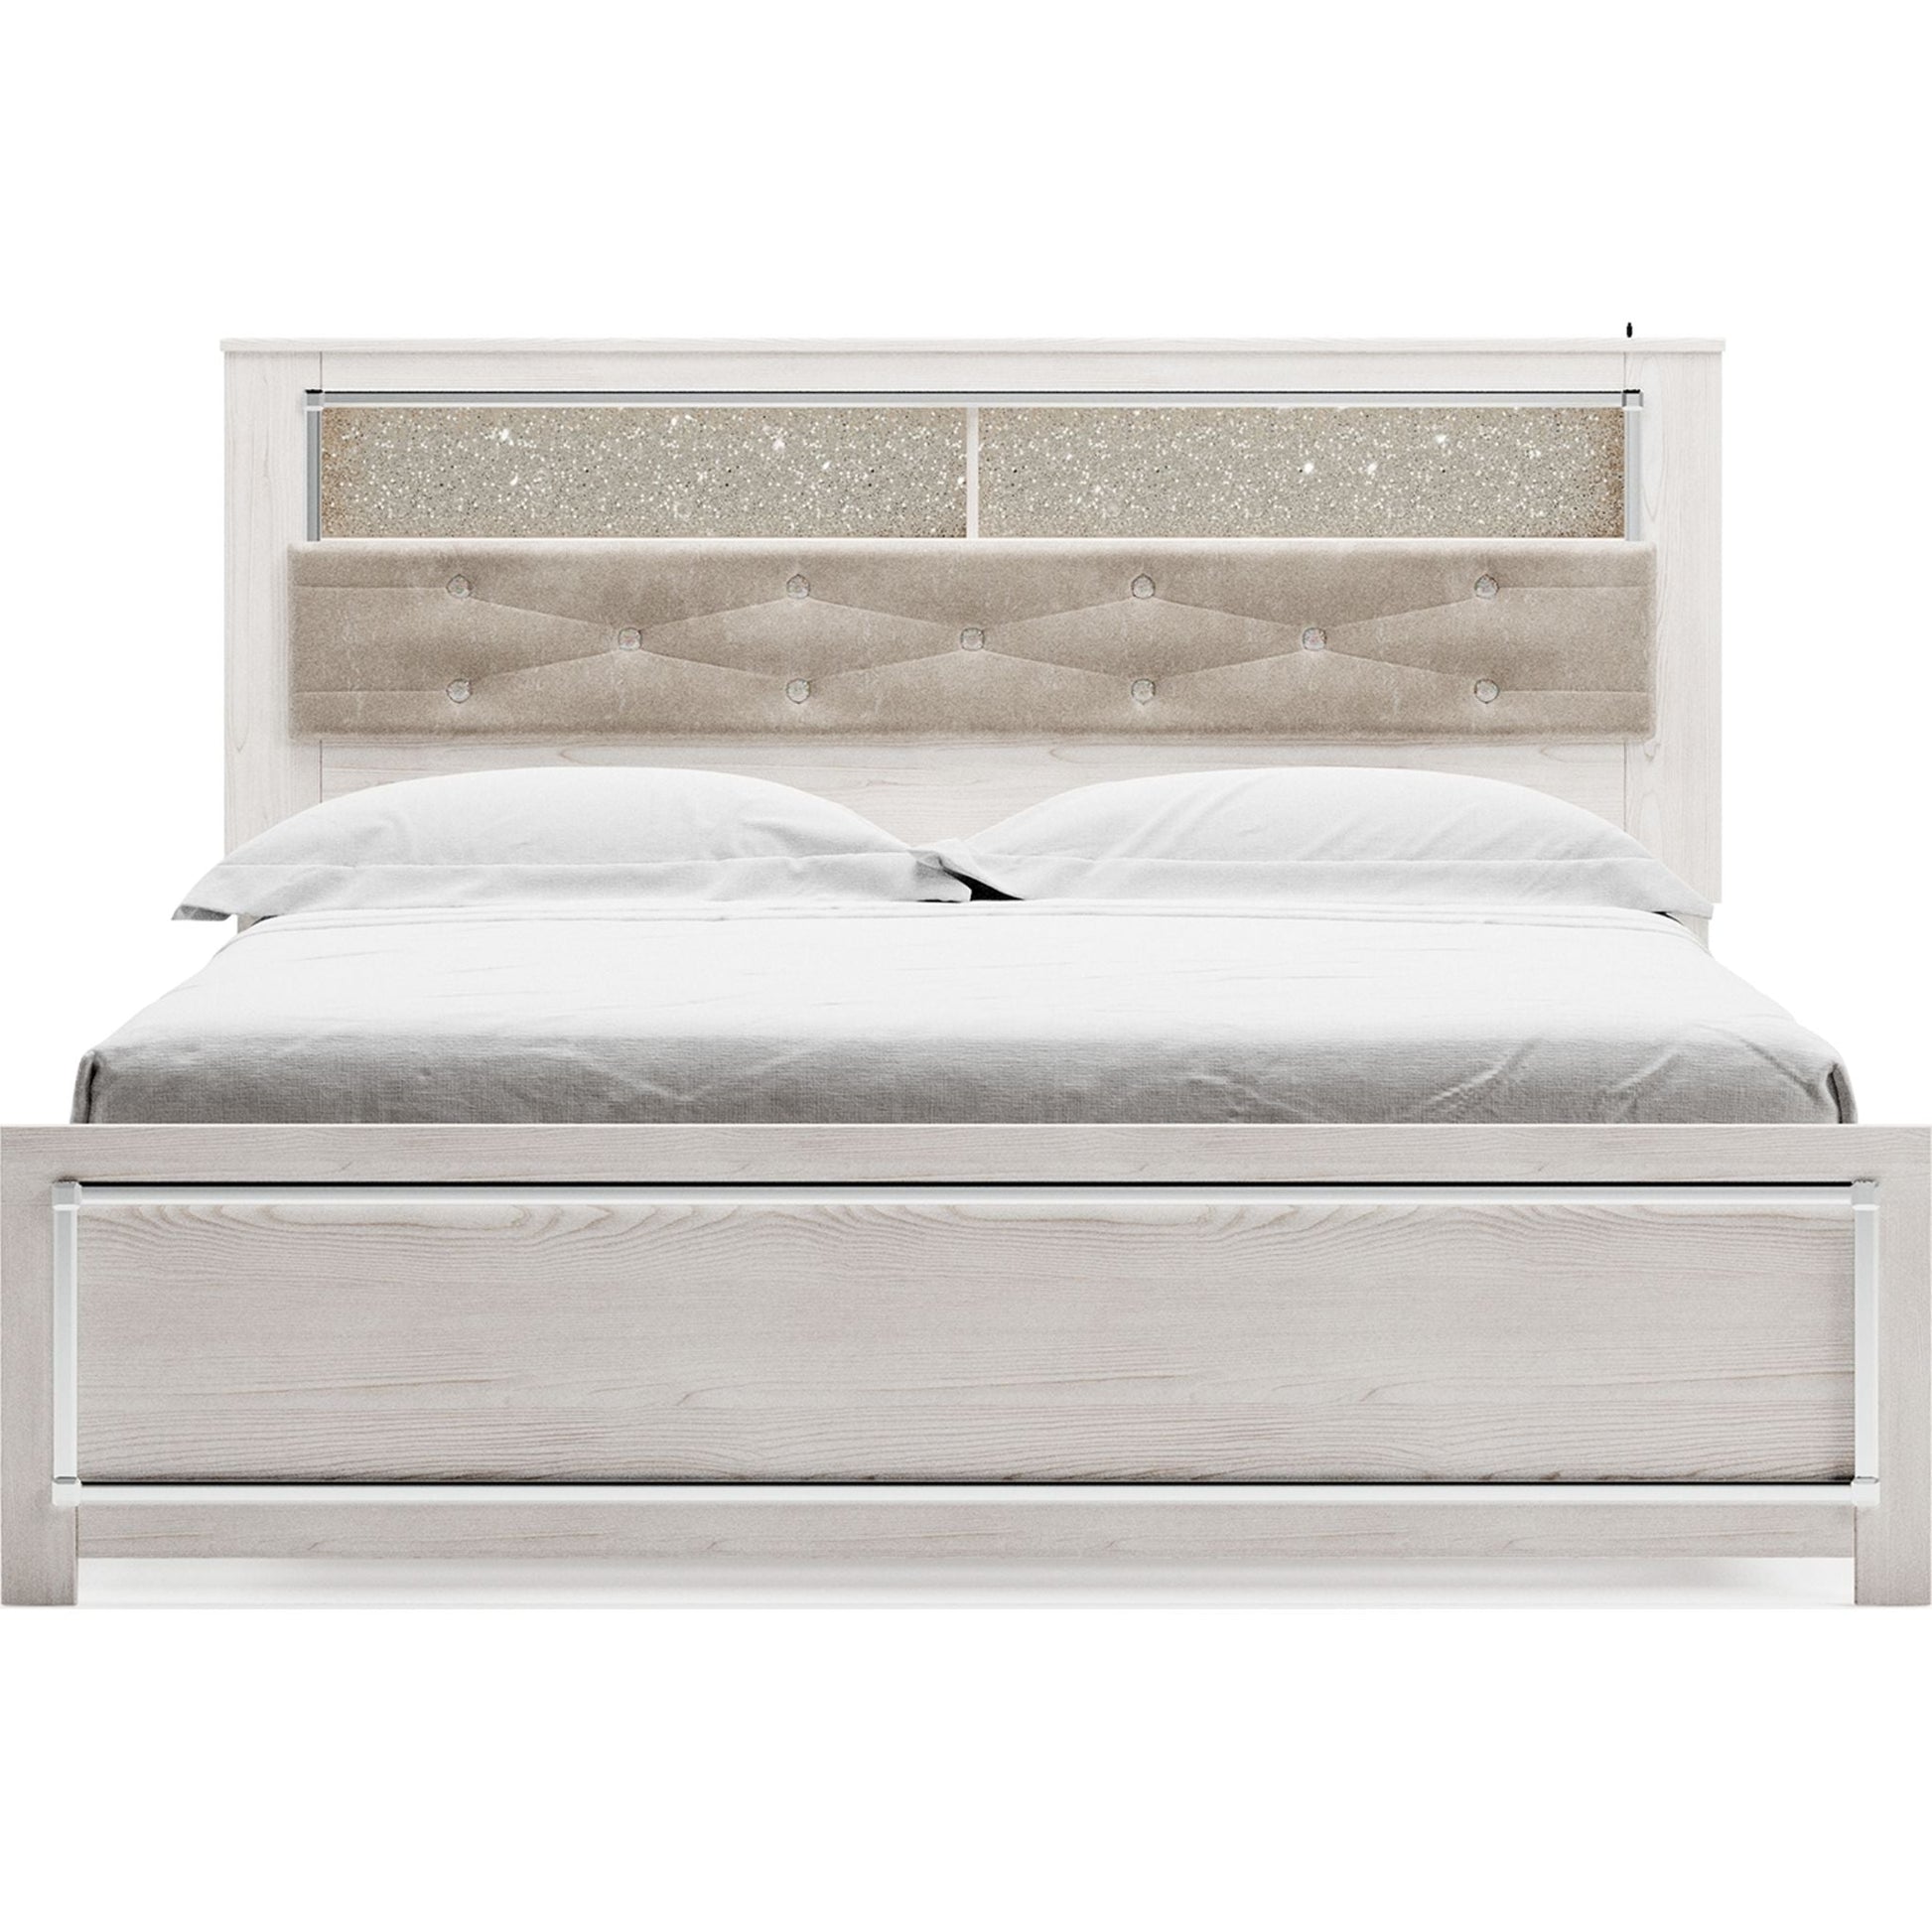 Oliah 3 Piece King Bed - White